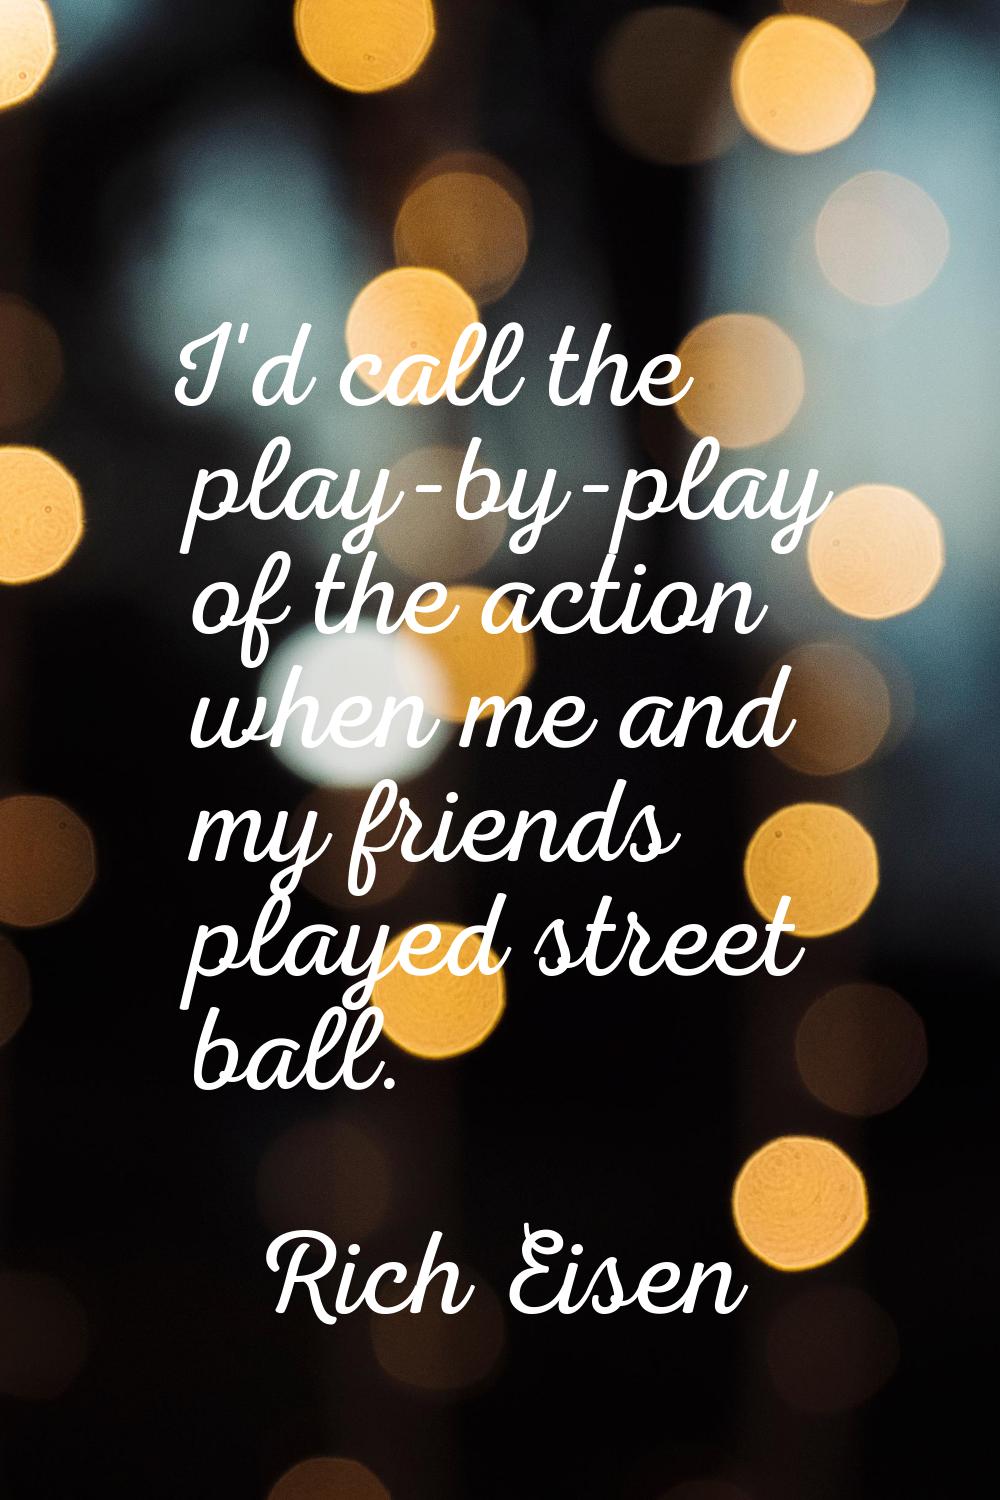 I'd call the play-by-play of the action when me and my friends played street ball.